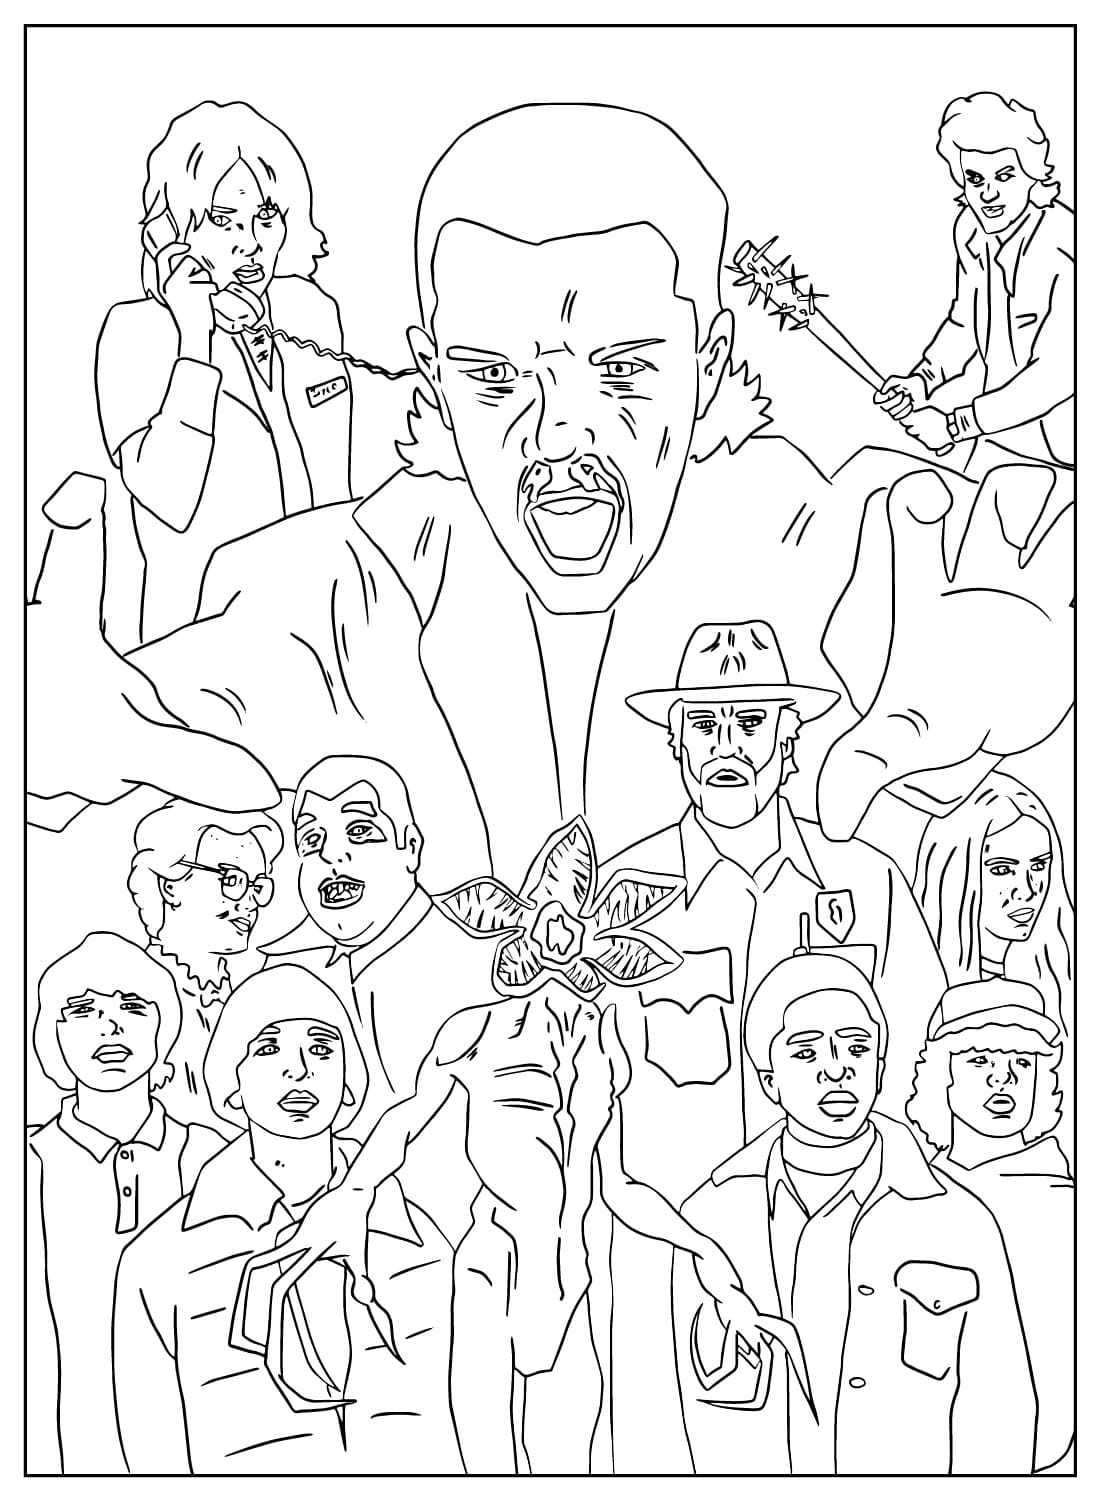 Stranger Things Coloring Page to Print from Stranger Things